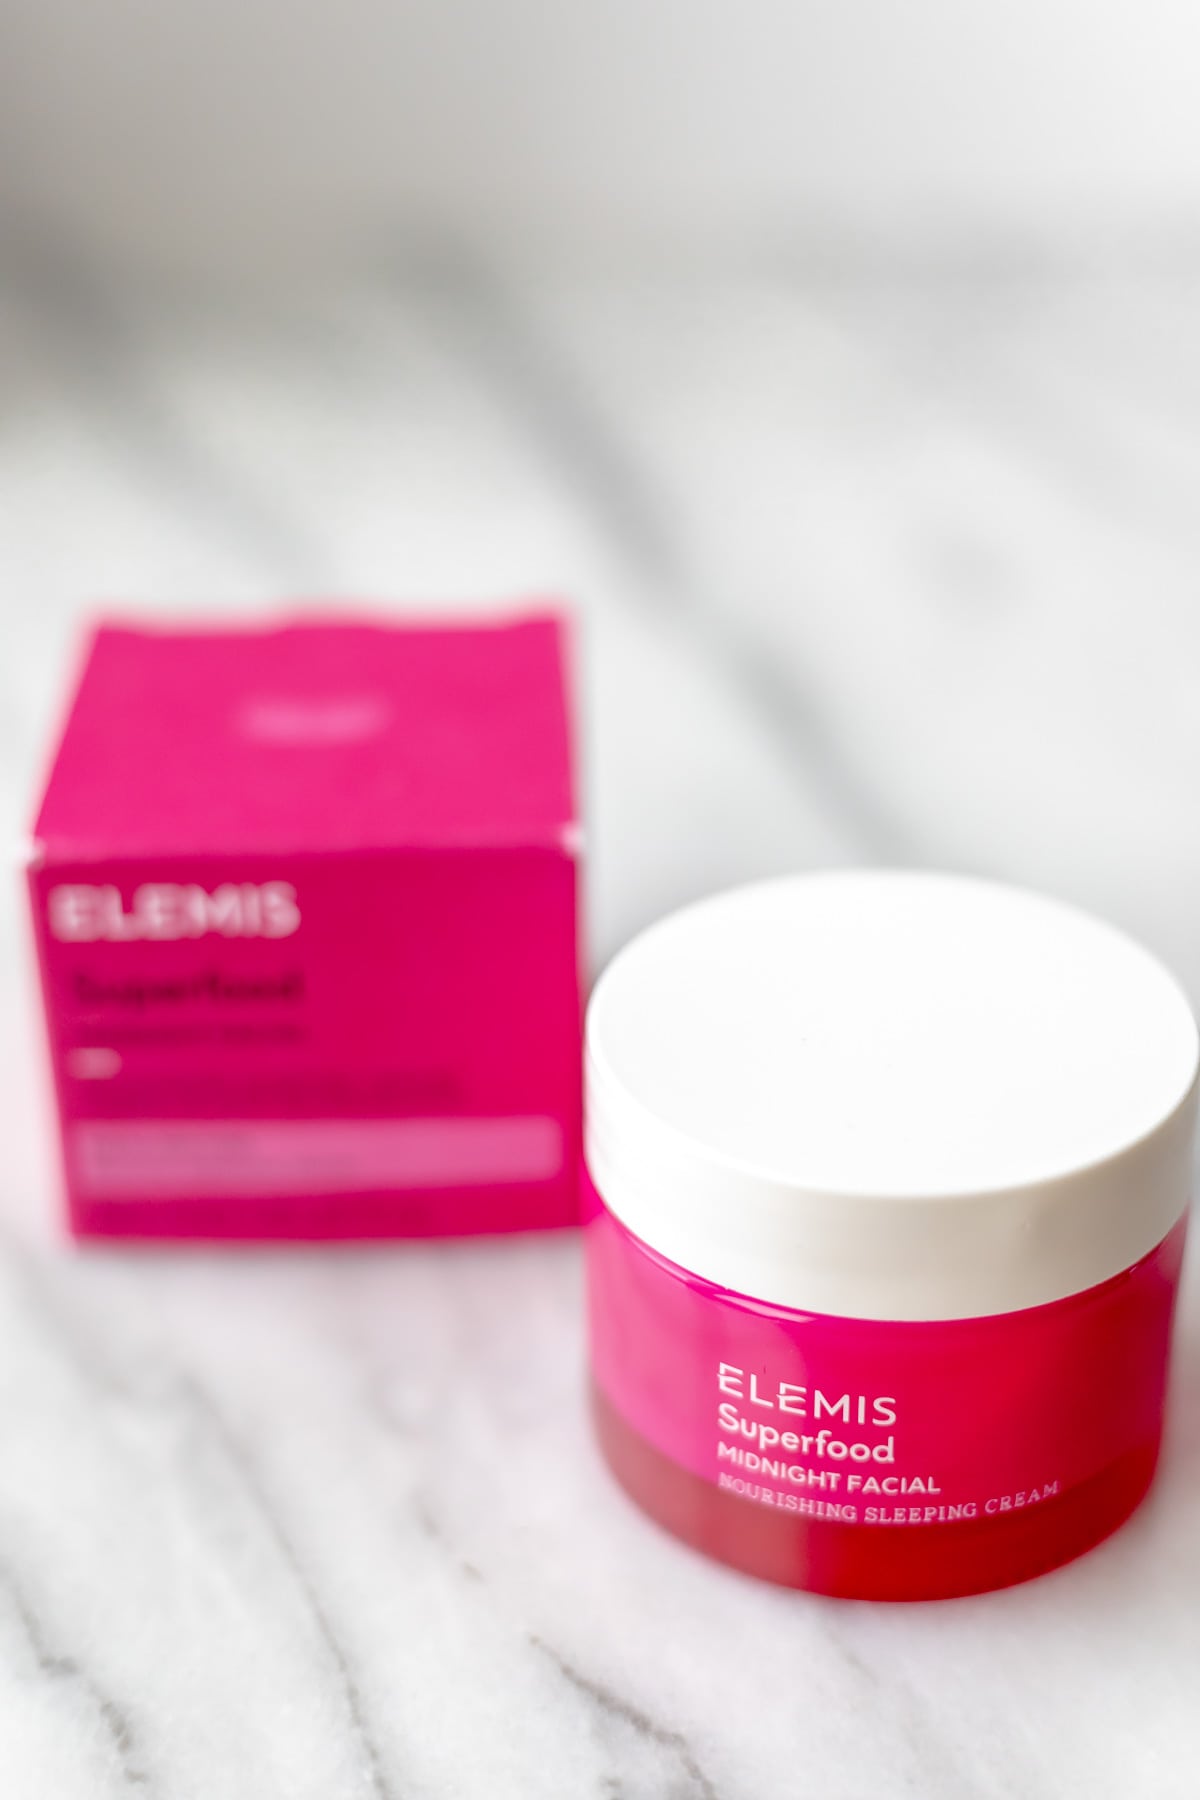 A jar of Elemis Midnight Facial and the box it comes in on a marble background.